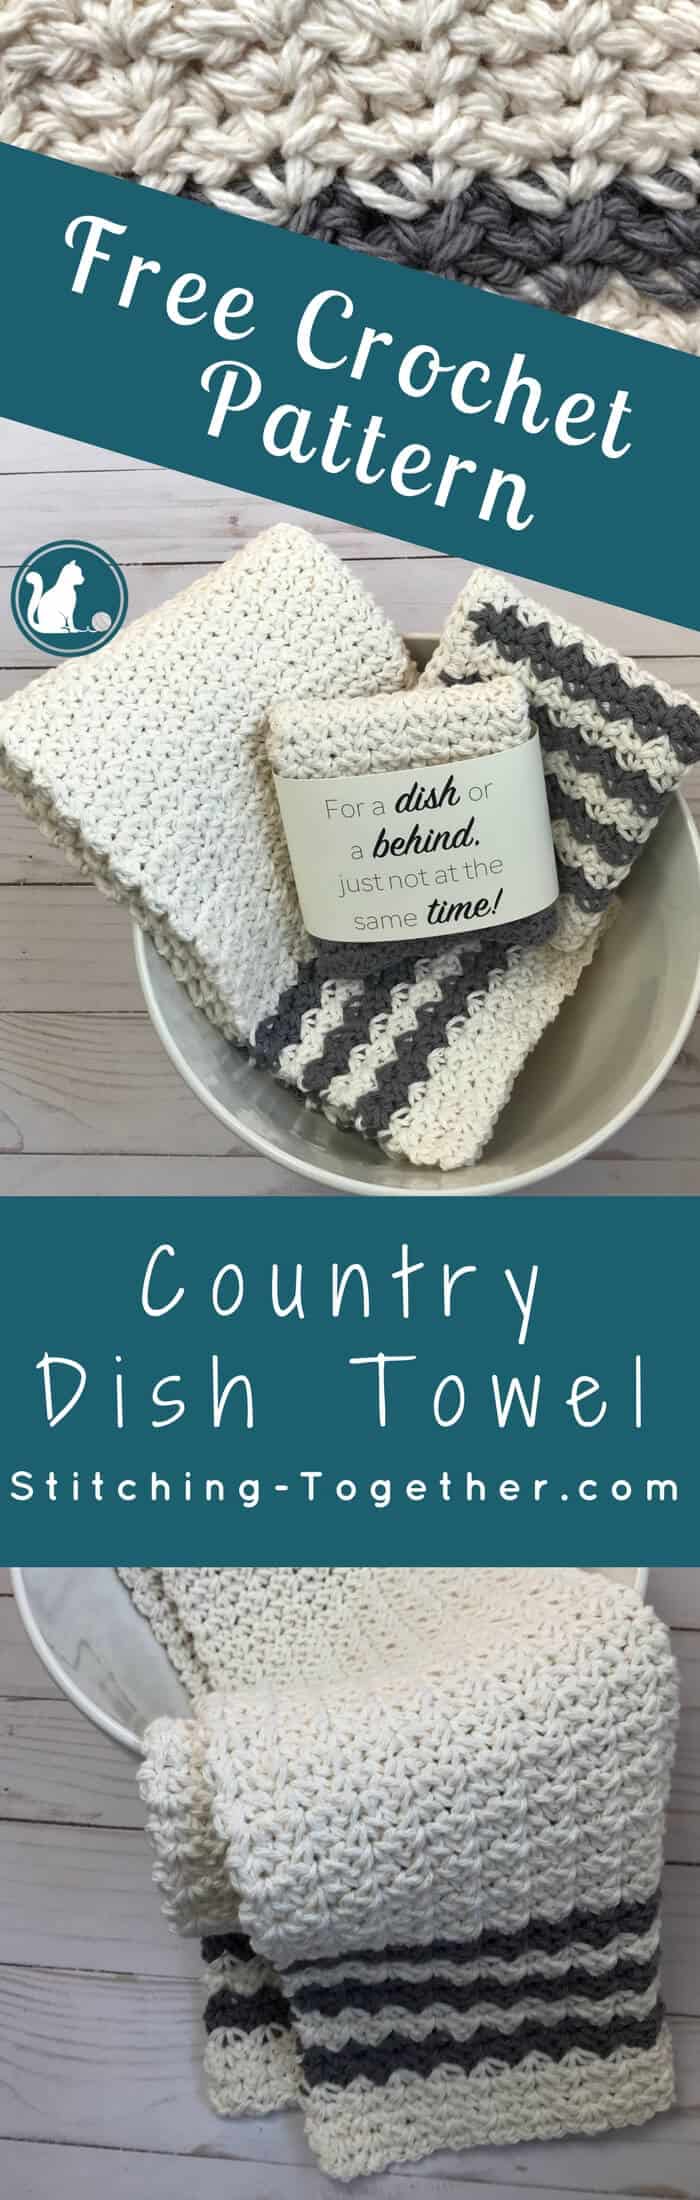 Free crochet pattern for this modern farmhouse dish towel. Add diy rustic style to your kitchen or bathroom.